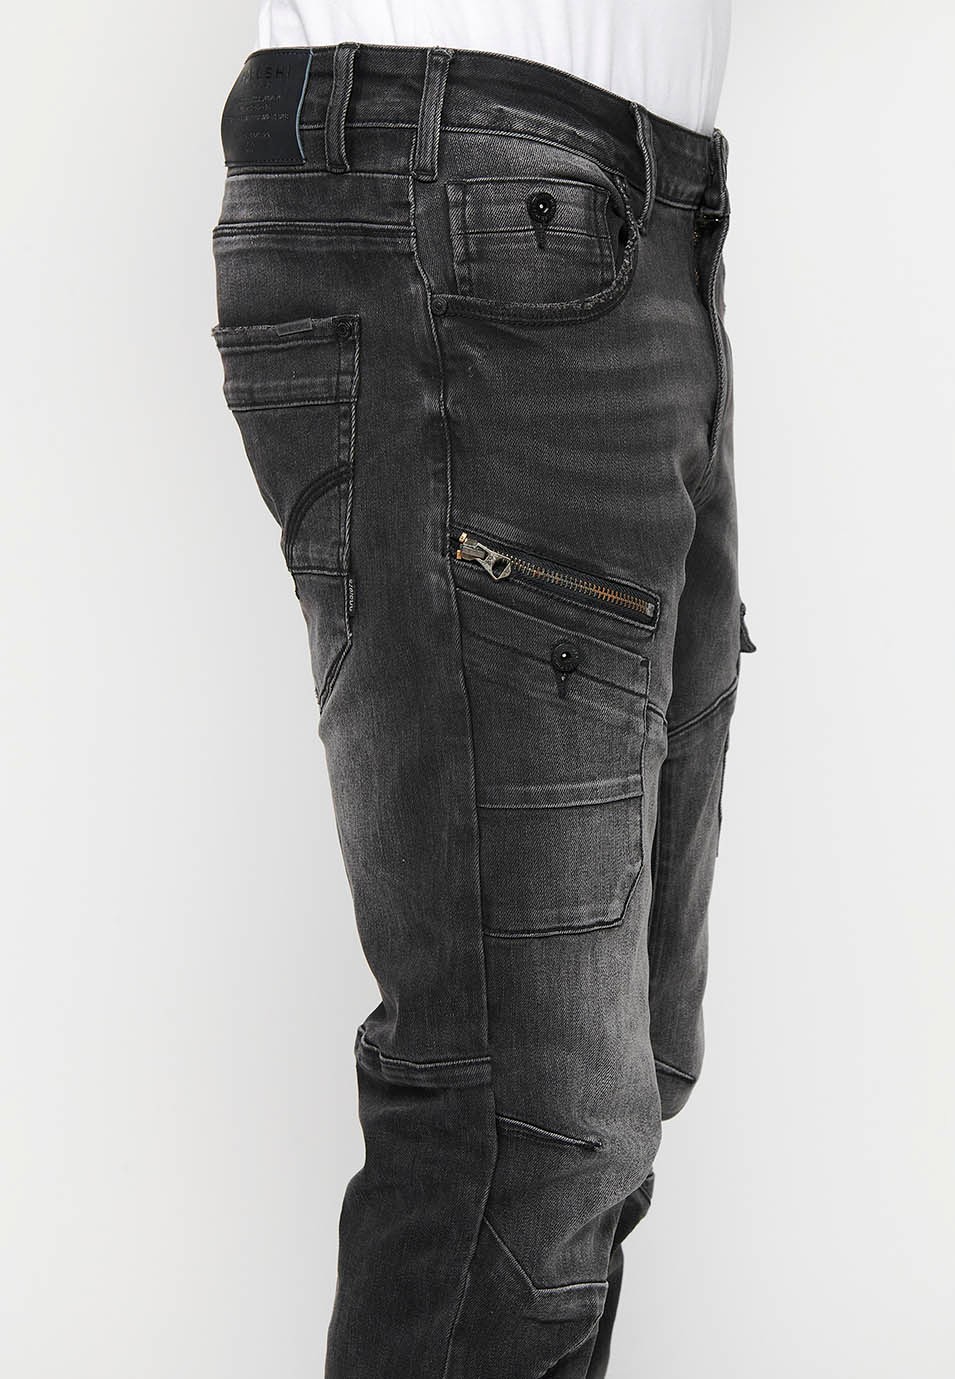 Long denim pants with front closure with zipper and button and pockets, two sides in Black for Men 7